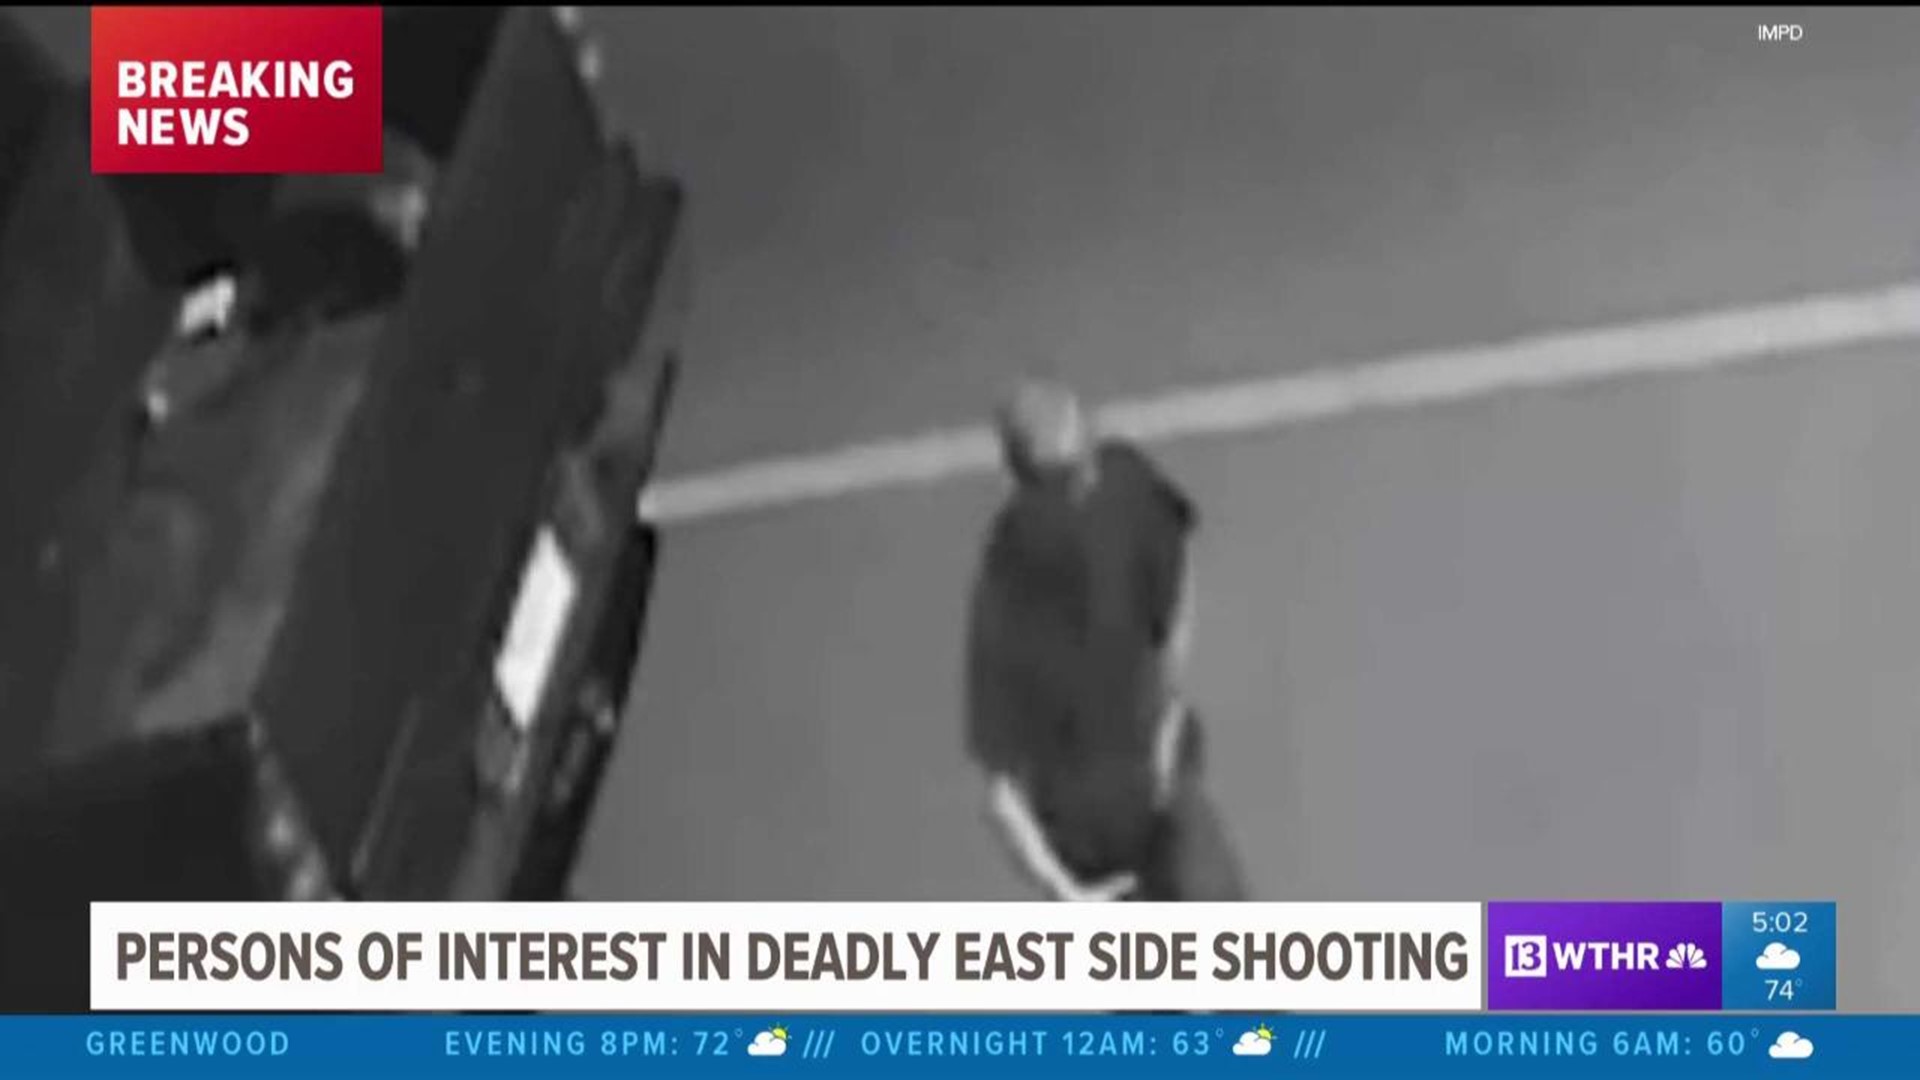 Persons of interest in deadly shooting